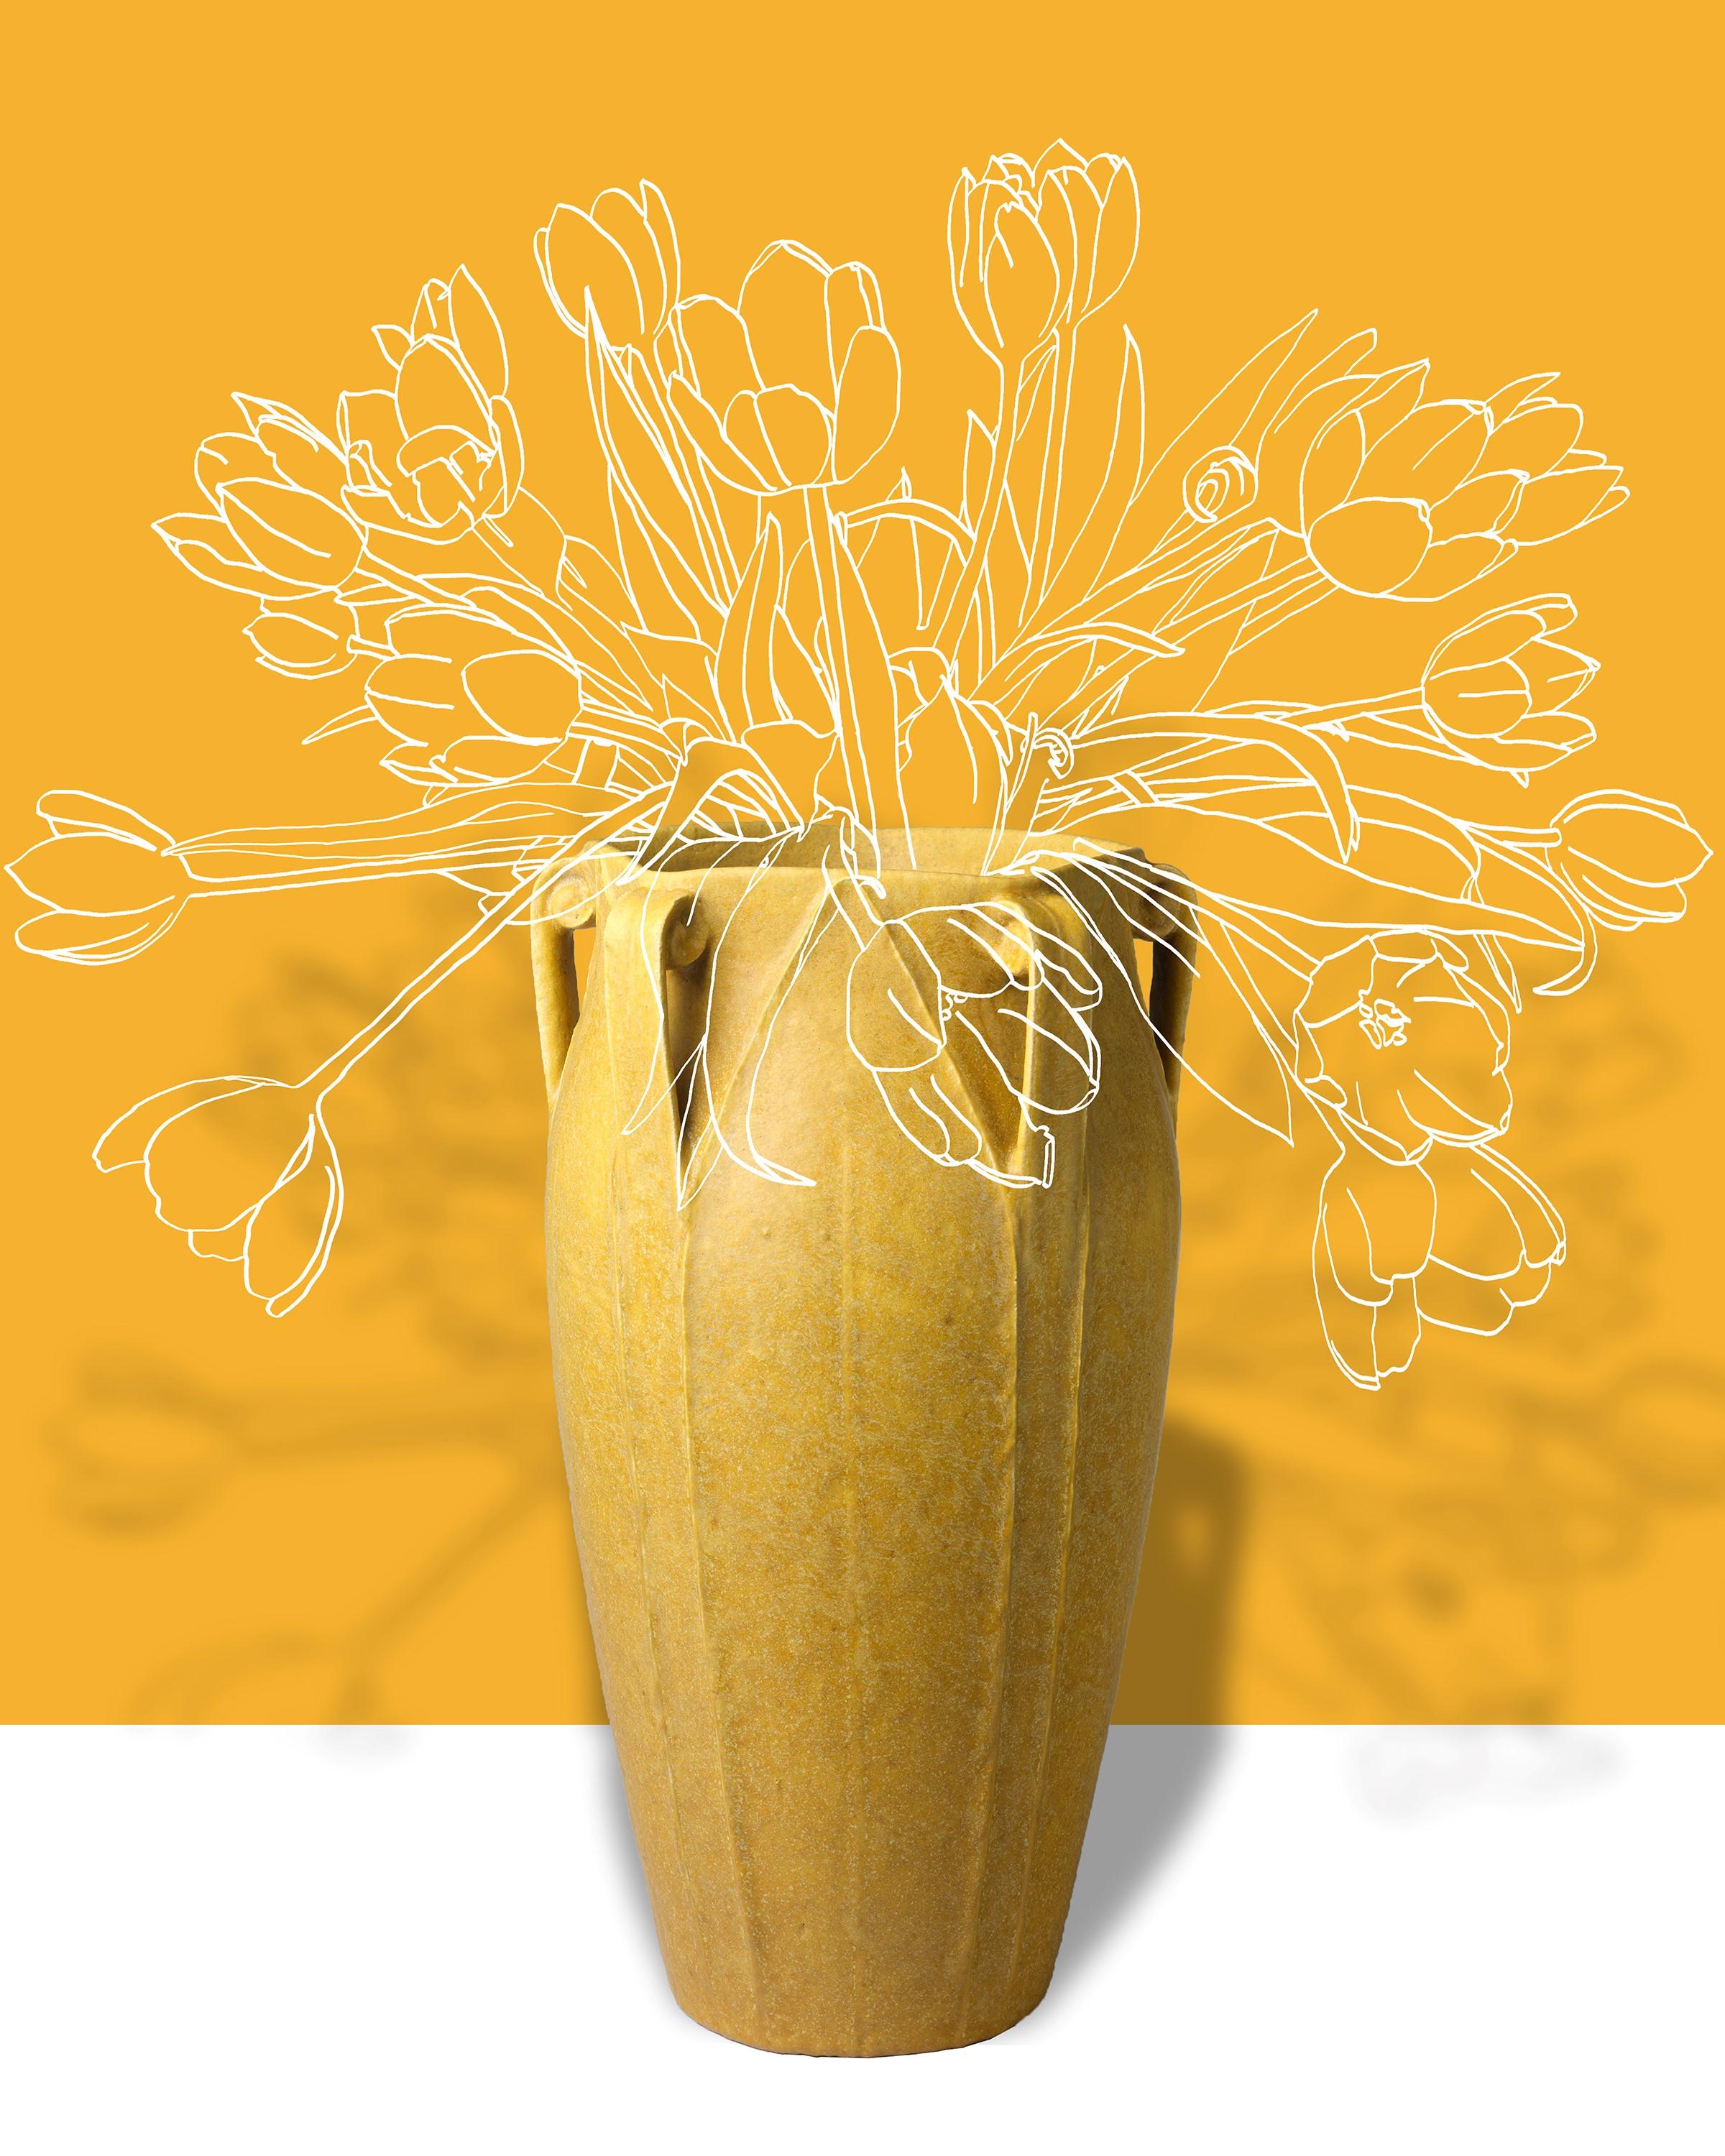 Bryan Meador Color Photograph - Saffron 1899: Pop Abstract Flower Still Life of Antique Vase Yellow Background